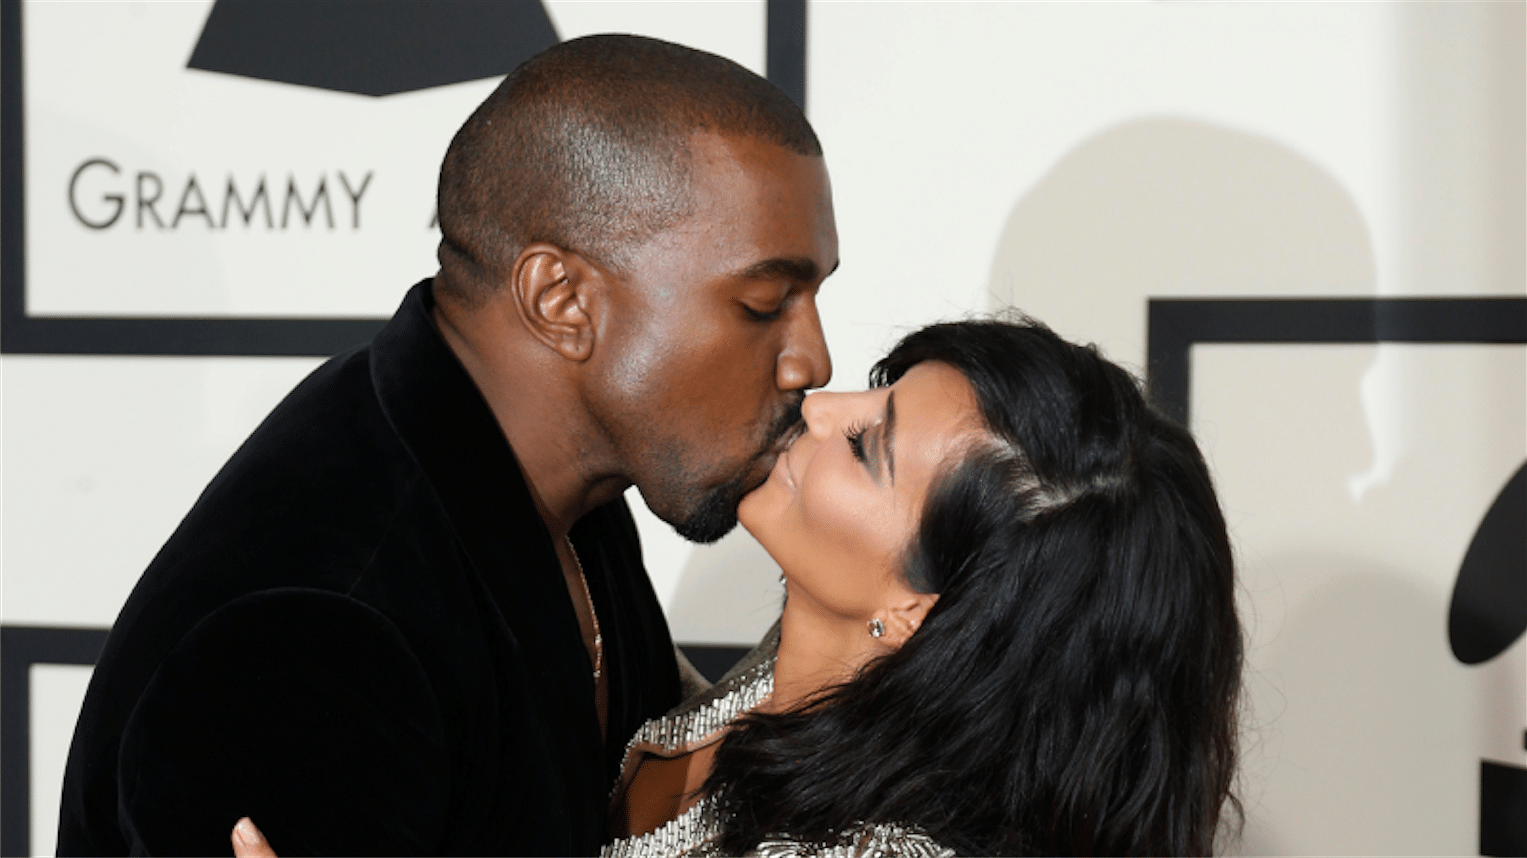 Kayne West and Kim Kardashian kiss for the shutterbugs at a Grammy event (Photo: Reuters)